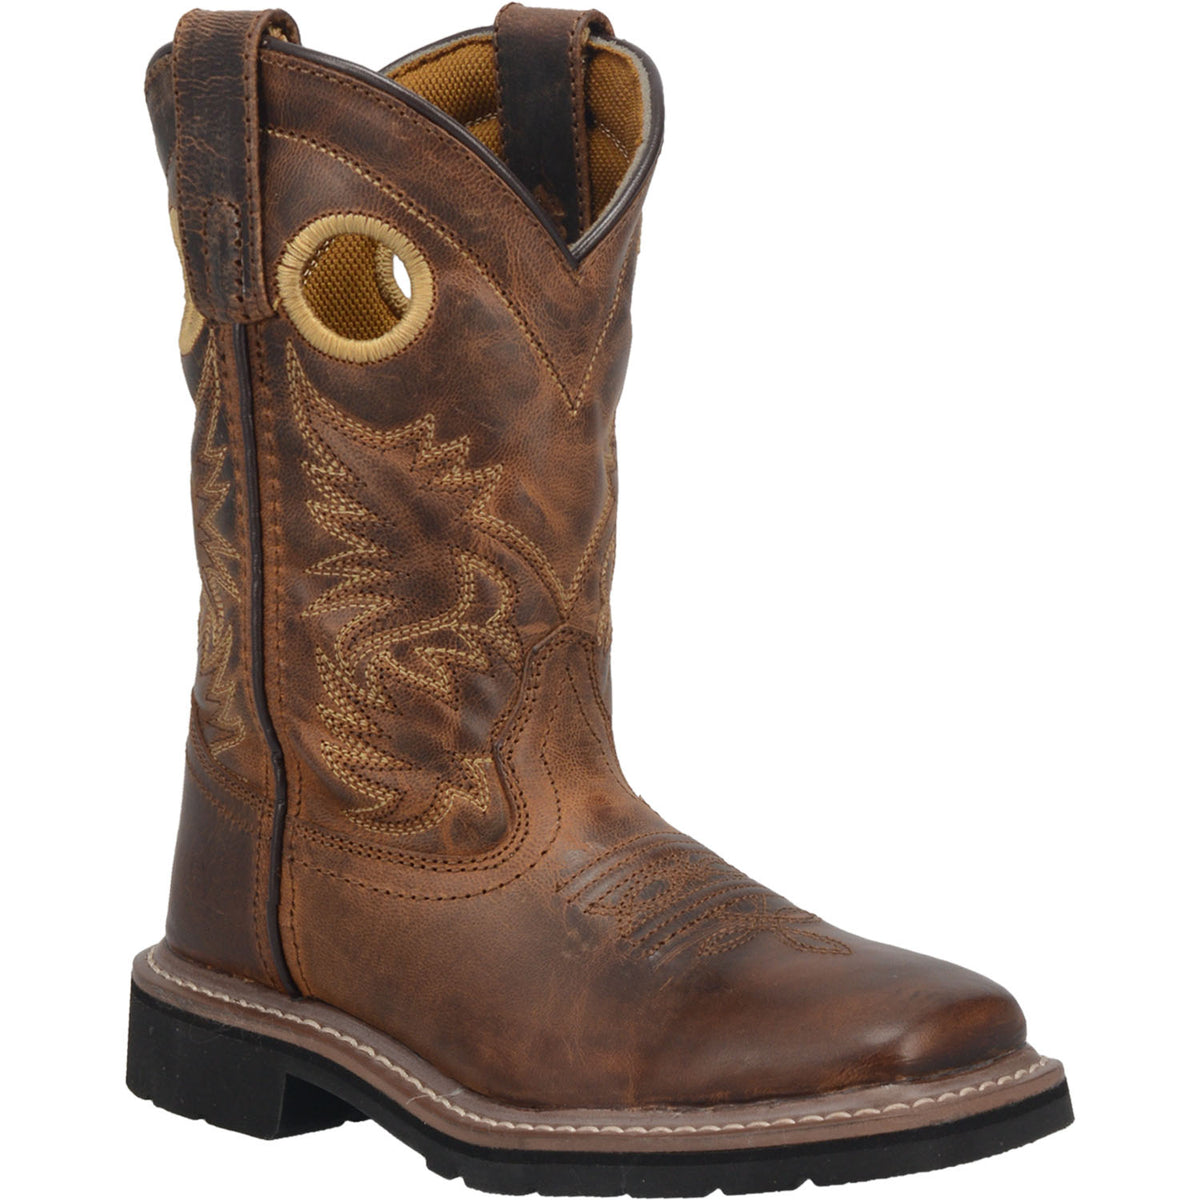 AMARILLO LEATHER YOUTH BOOT Cover